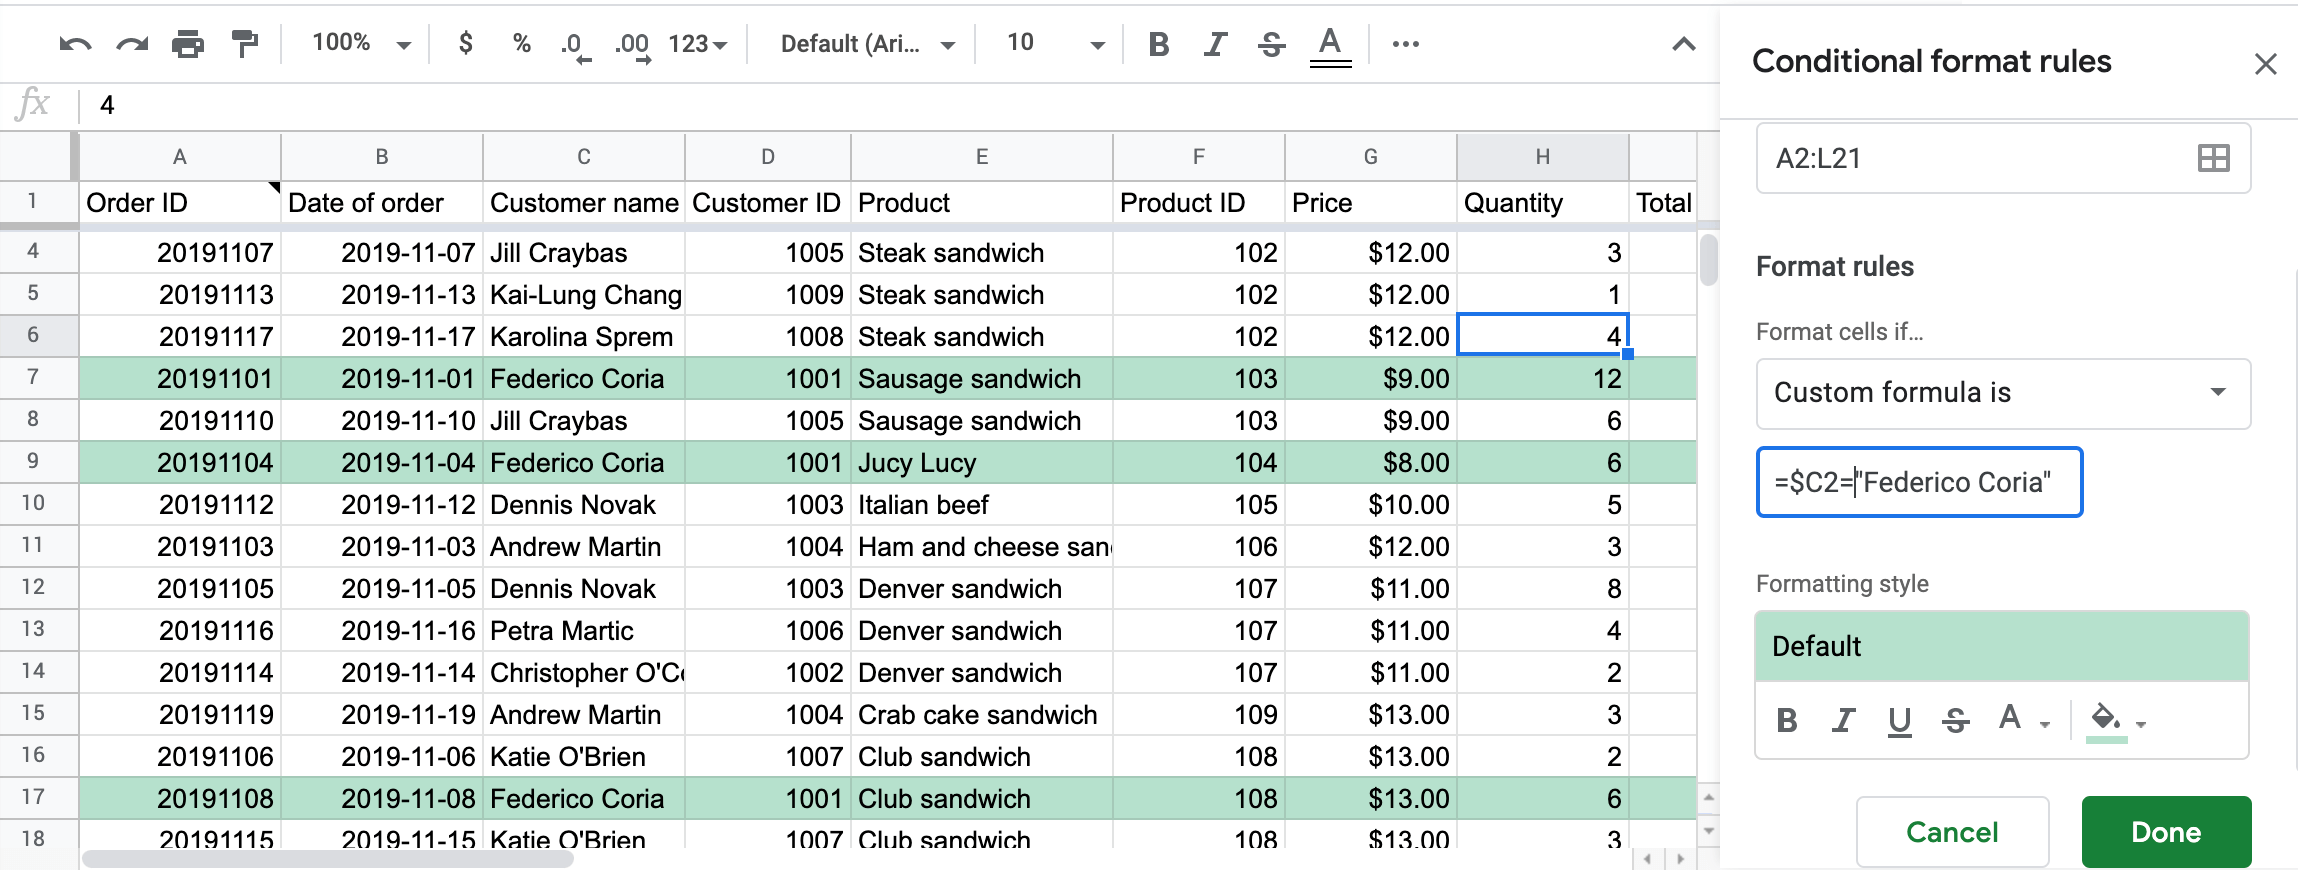 Full row conditional formatting in Google Sheets